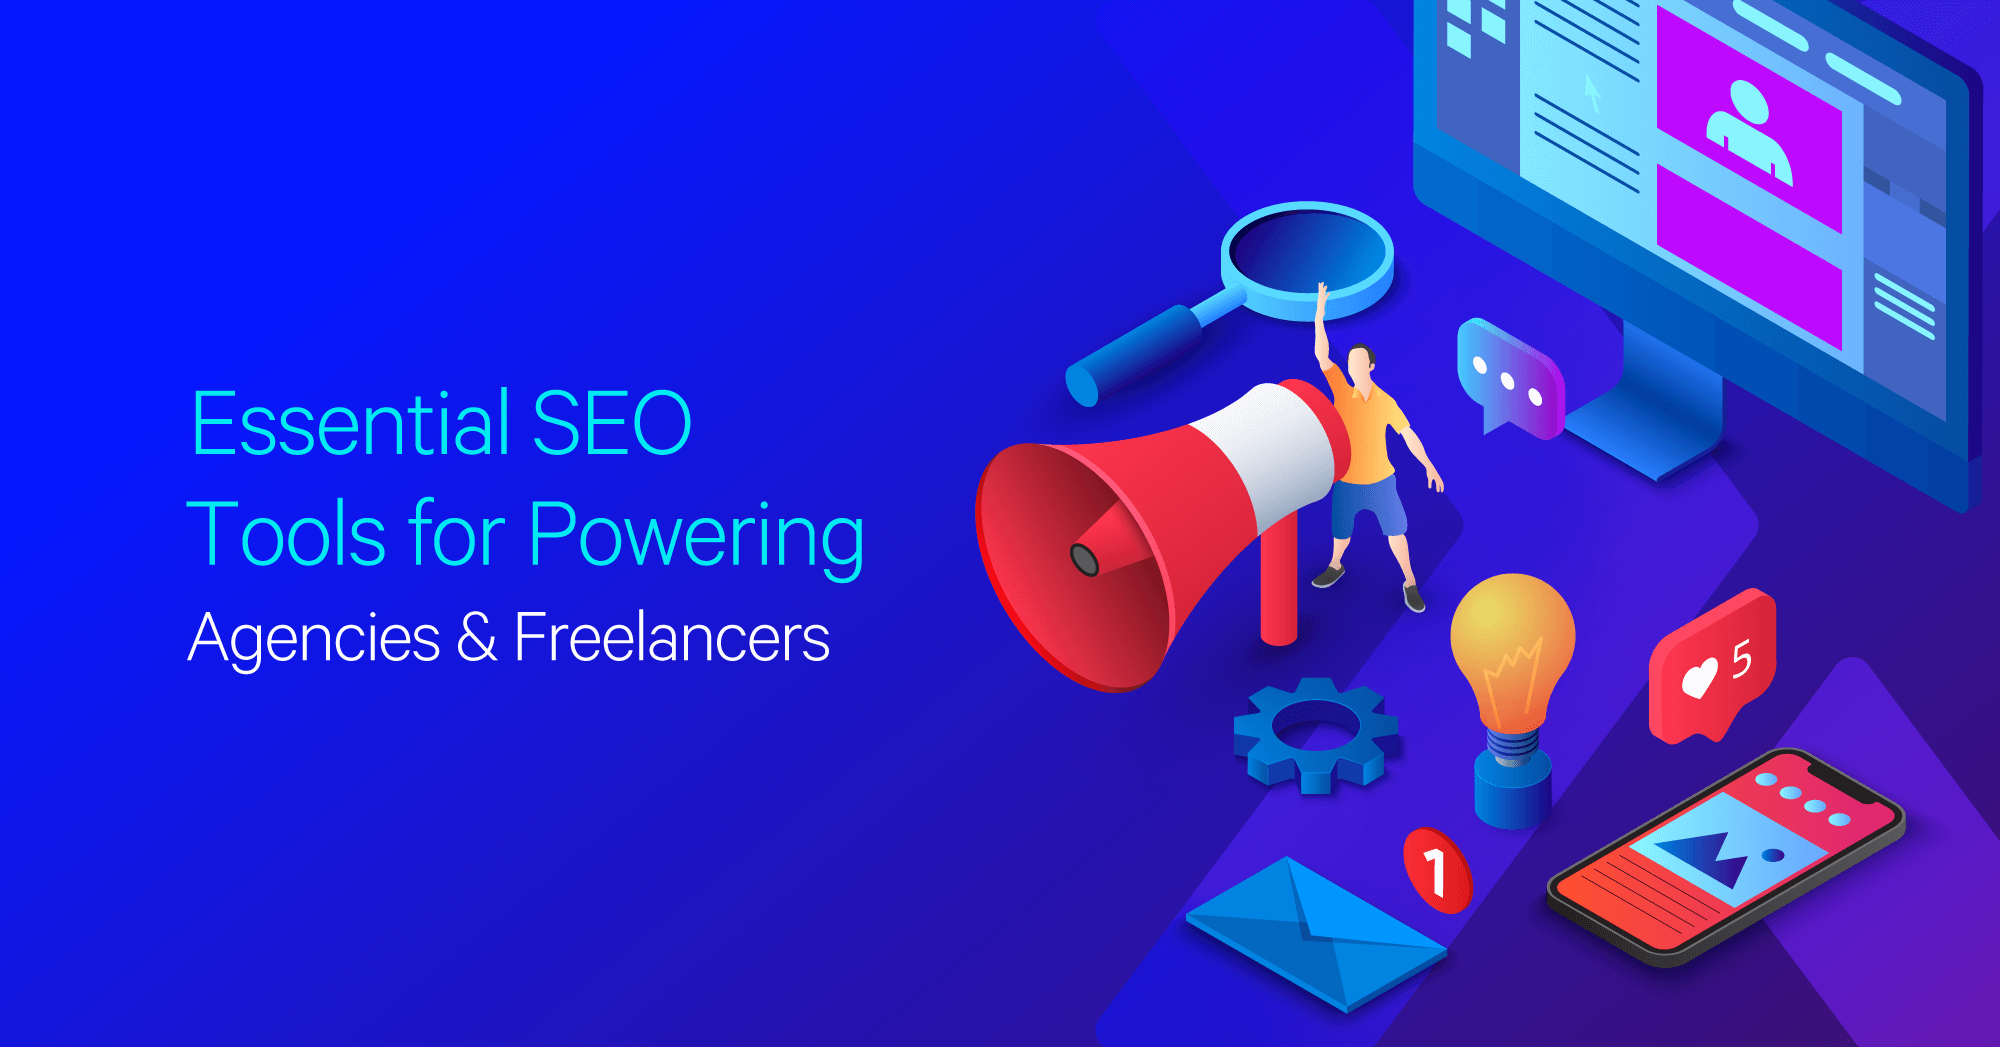 Never Lose Your SEO Again